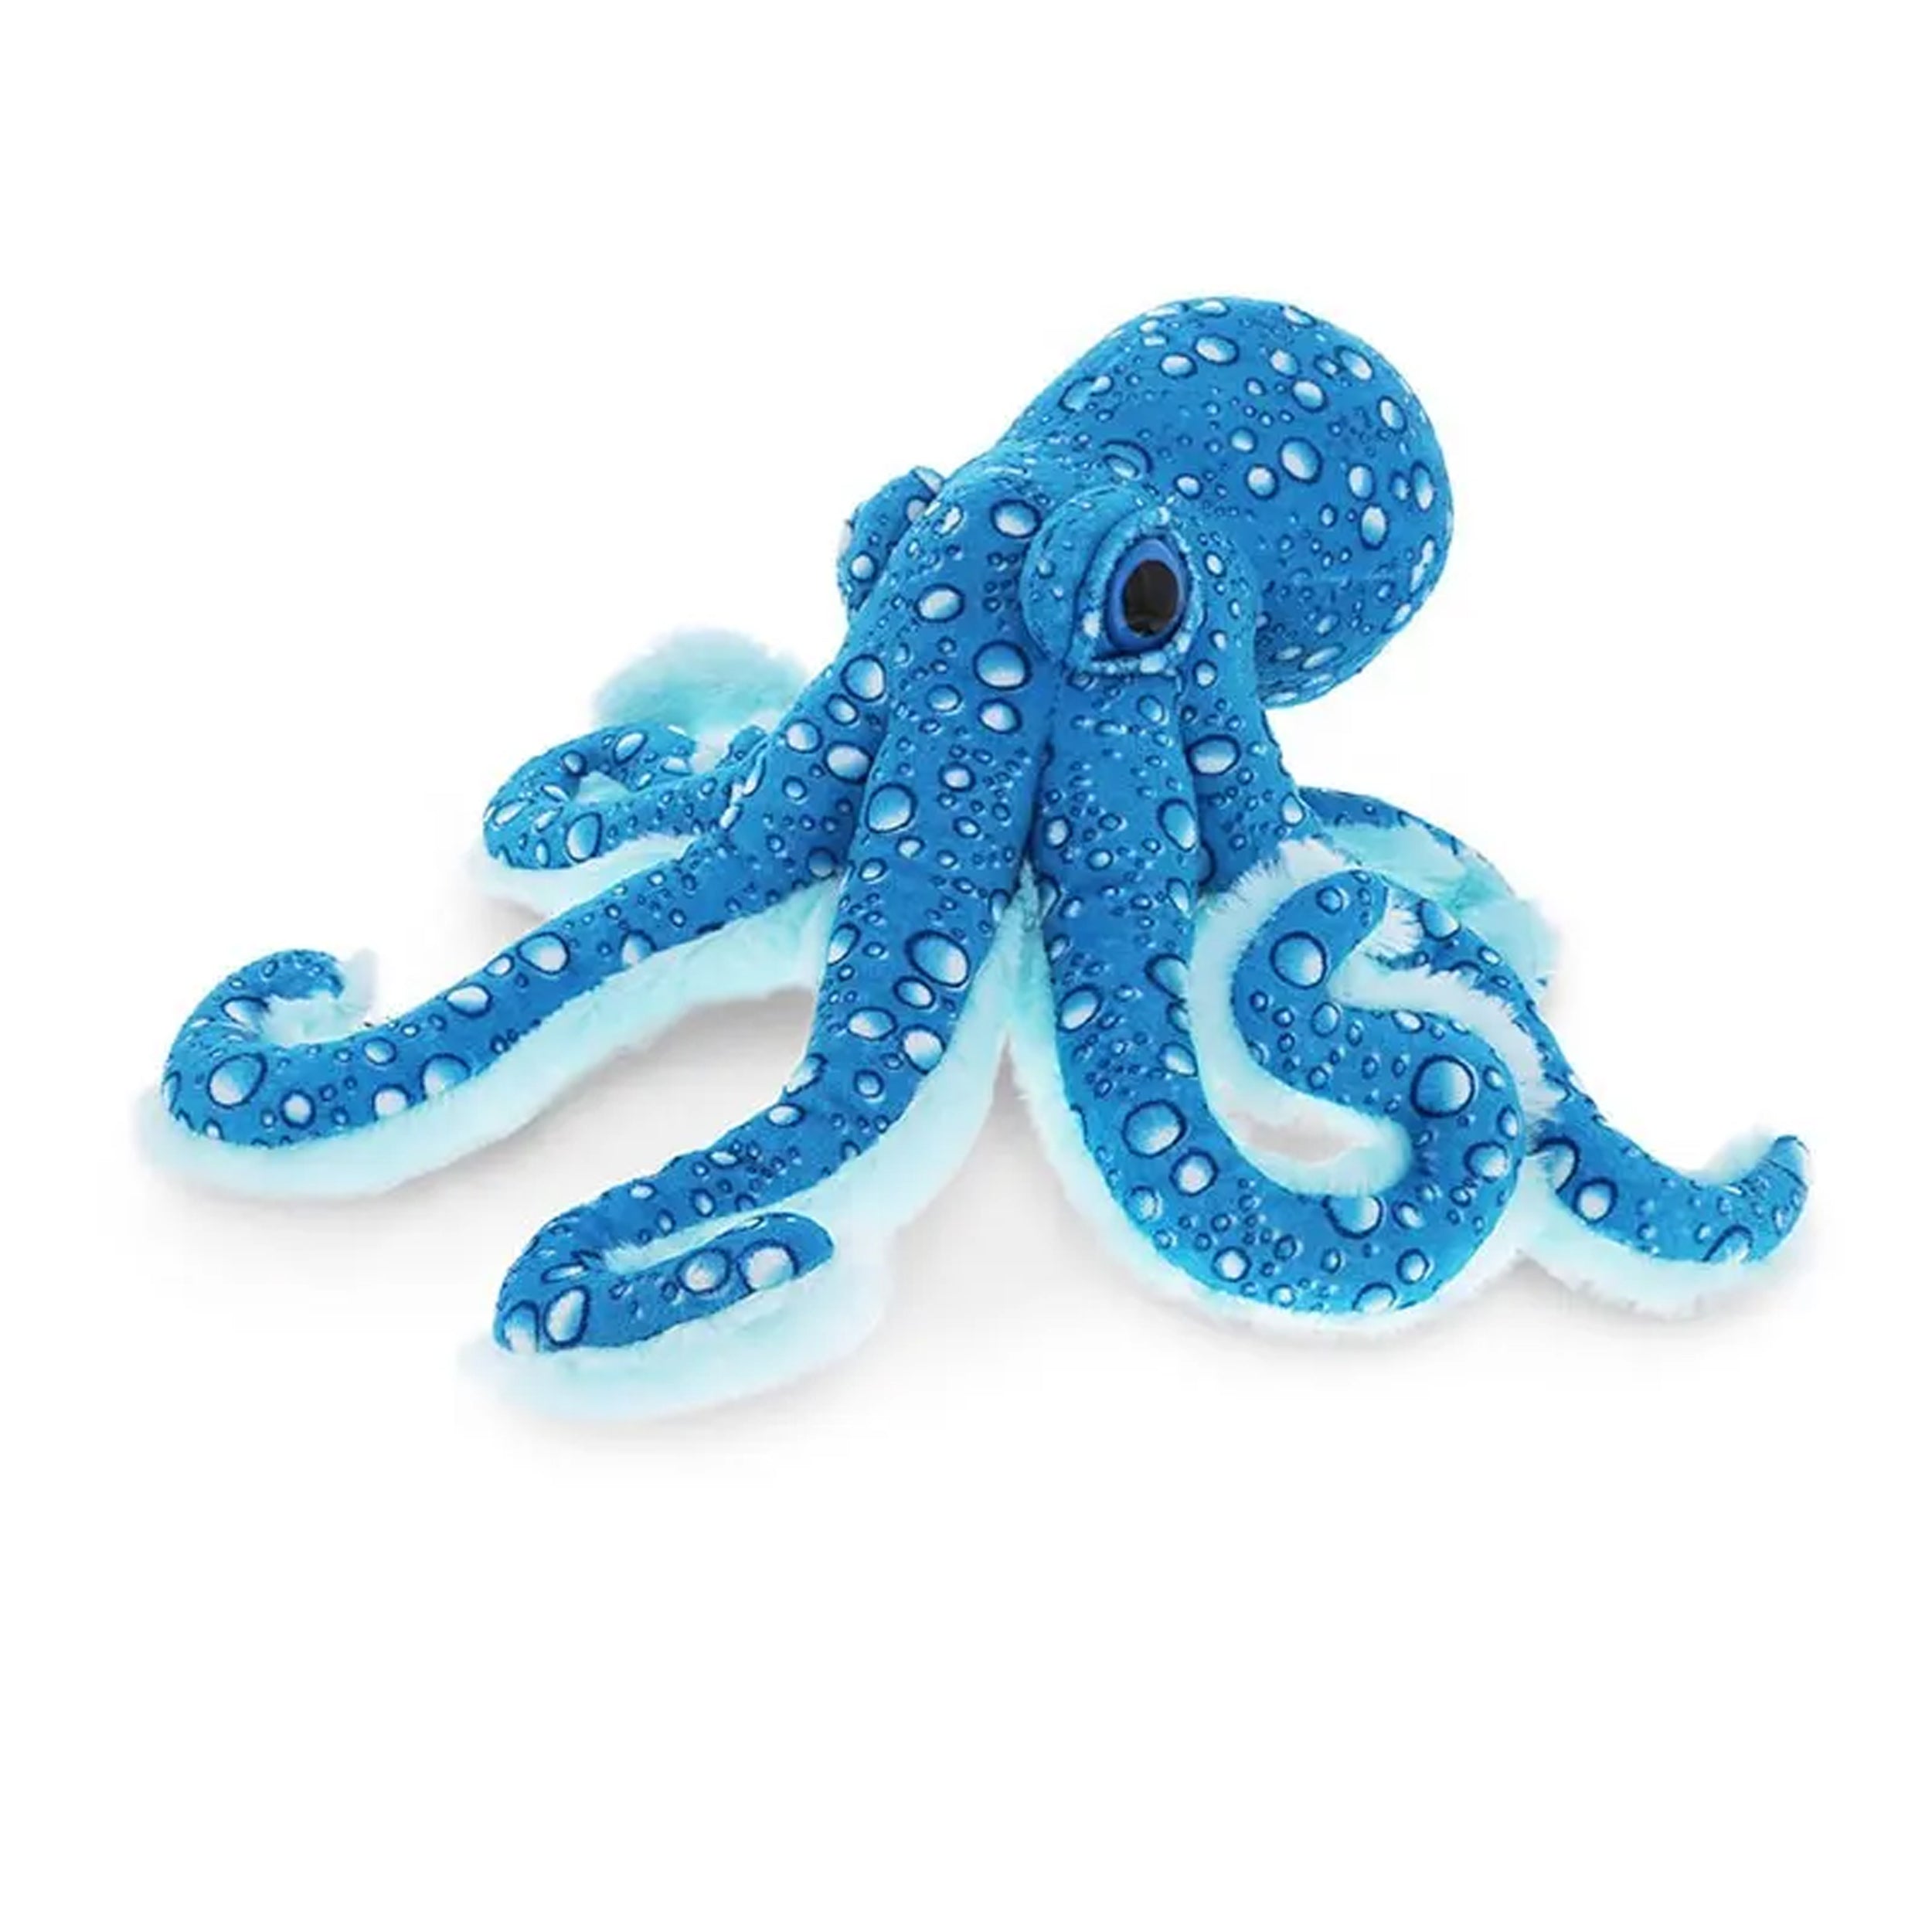 Bring the Ocean to Life with Octopus and Crab Plush Stuffed Sea Animal Toys